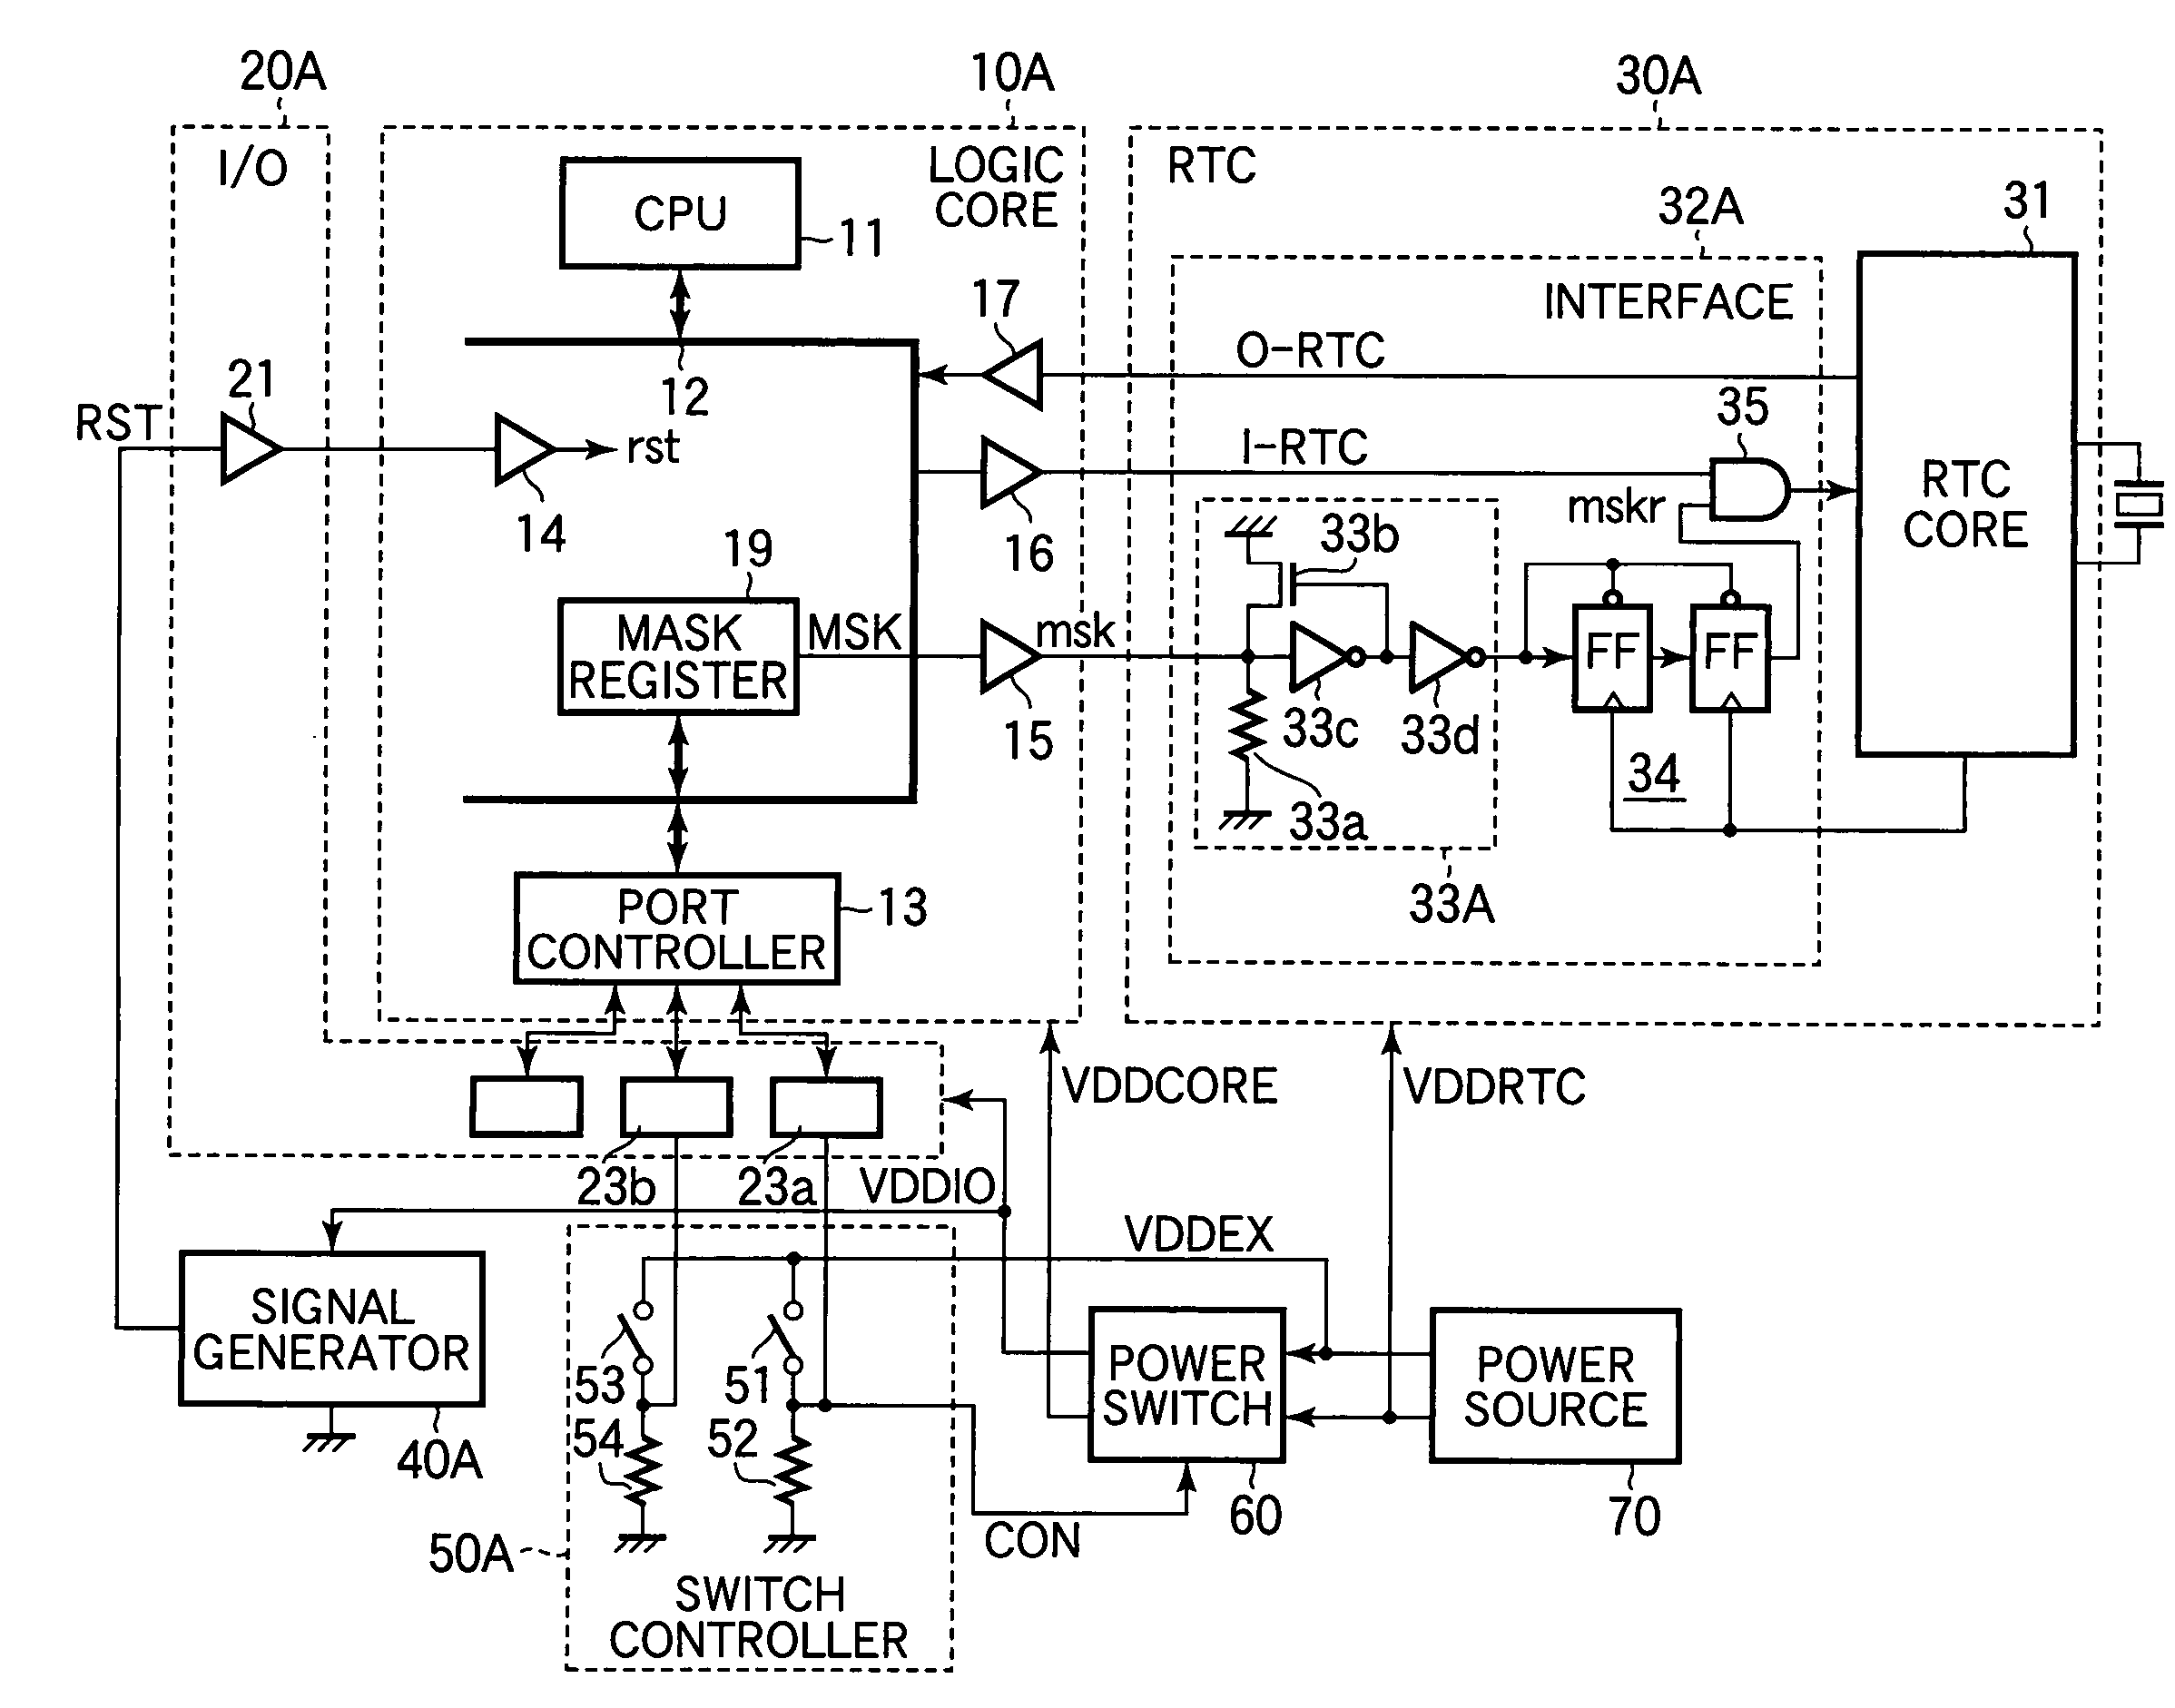 Semiconductor circuit with mask register